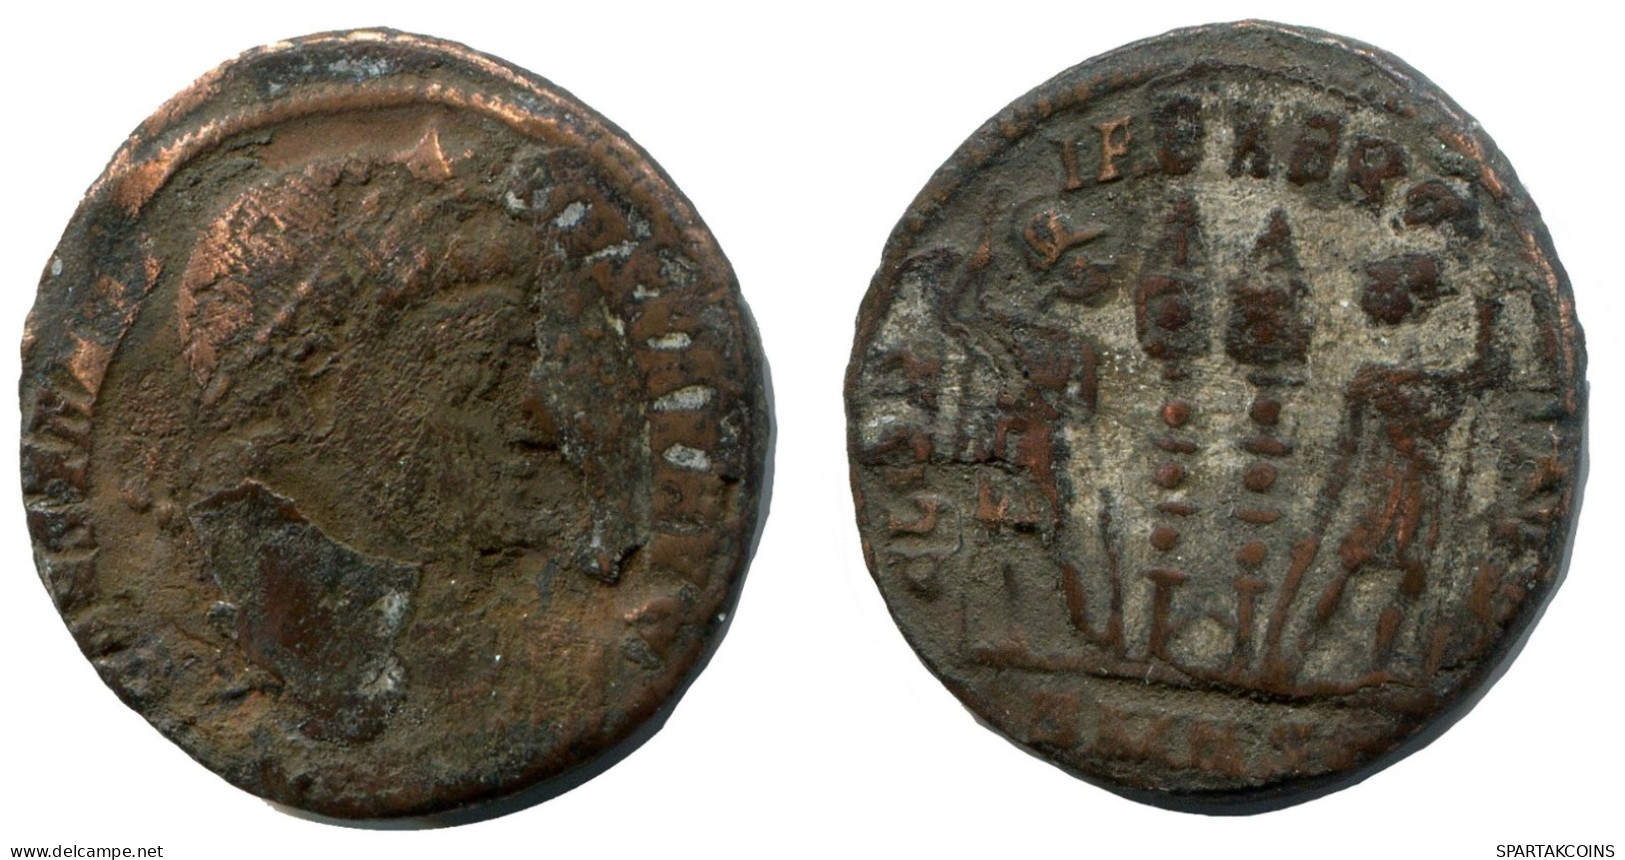 CONSTANTINE I MINTED IN NICOMEDIA FOUND IN IHNASYAH HOARD EGYPT #ANC10831.14.F.A - El Imperio Christiano (307 / 363)